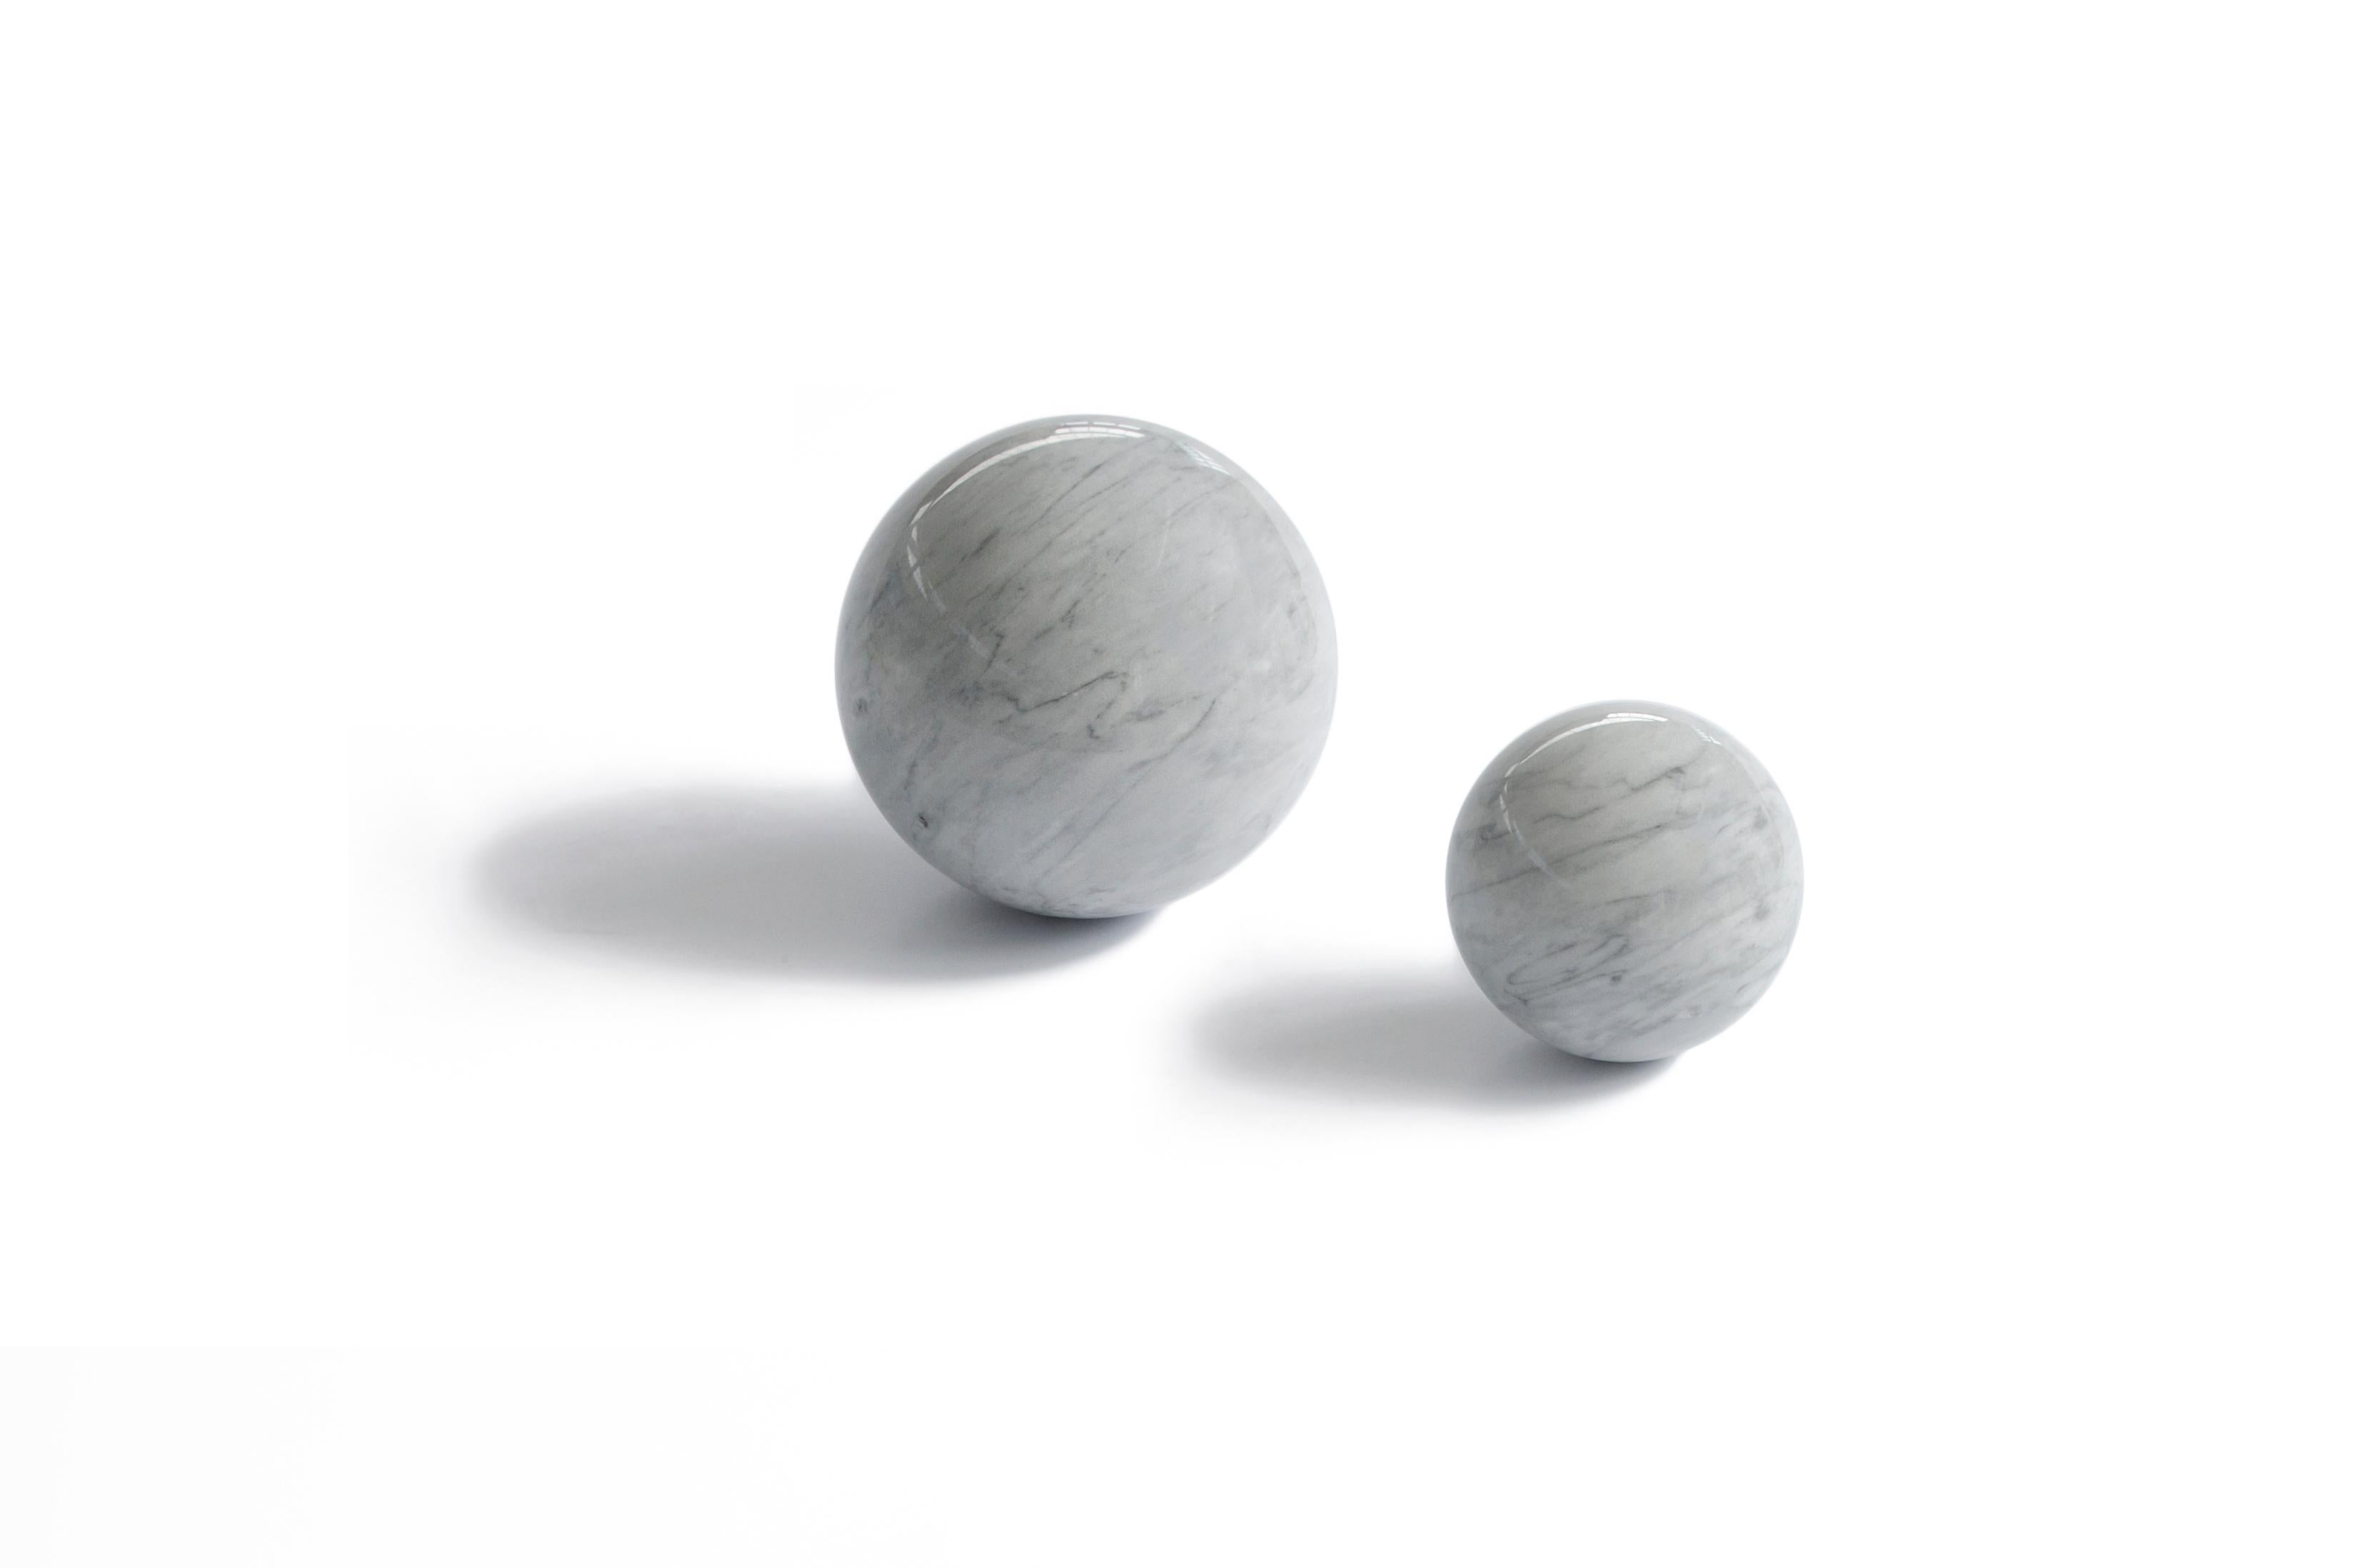 Paperweight with sphere shape in grey Bardiglio marble. Measure: diameter 12cm

Each piece is in a way unique (since each marble block is different in veins and shades) and handcrafted in Italy. Slight variations in shape, color and size are to be